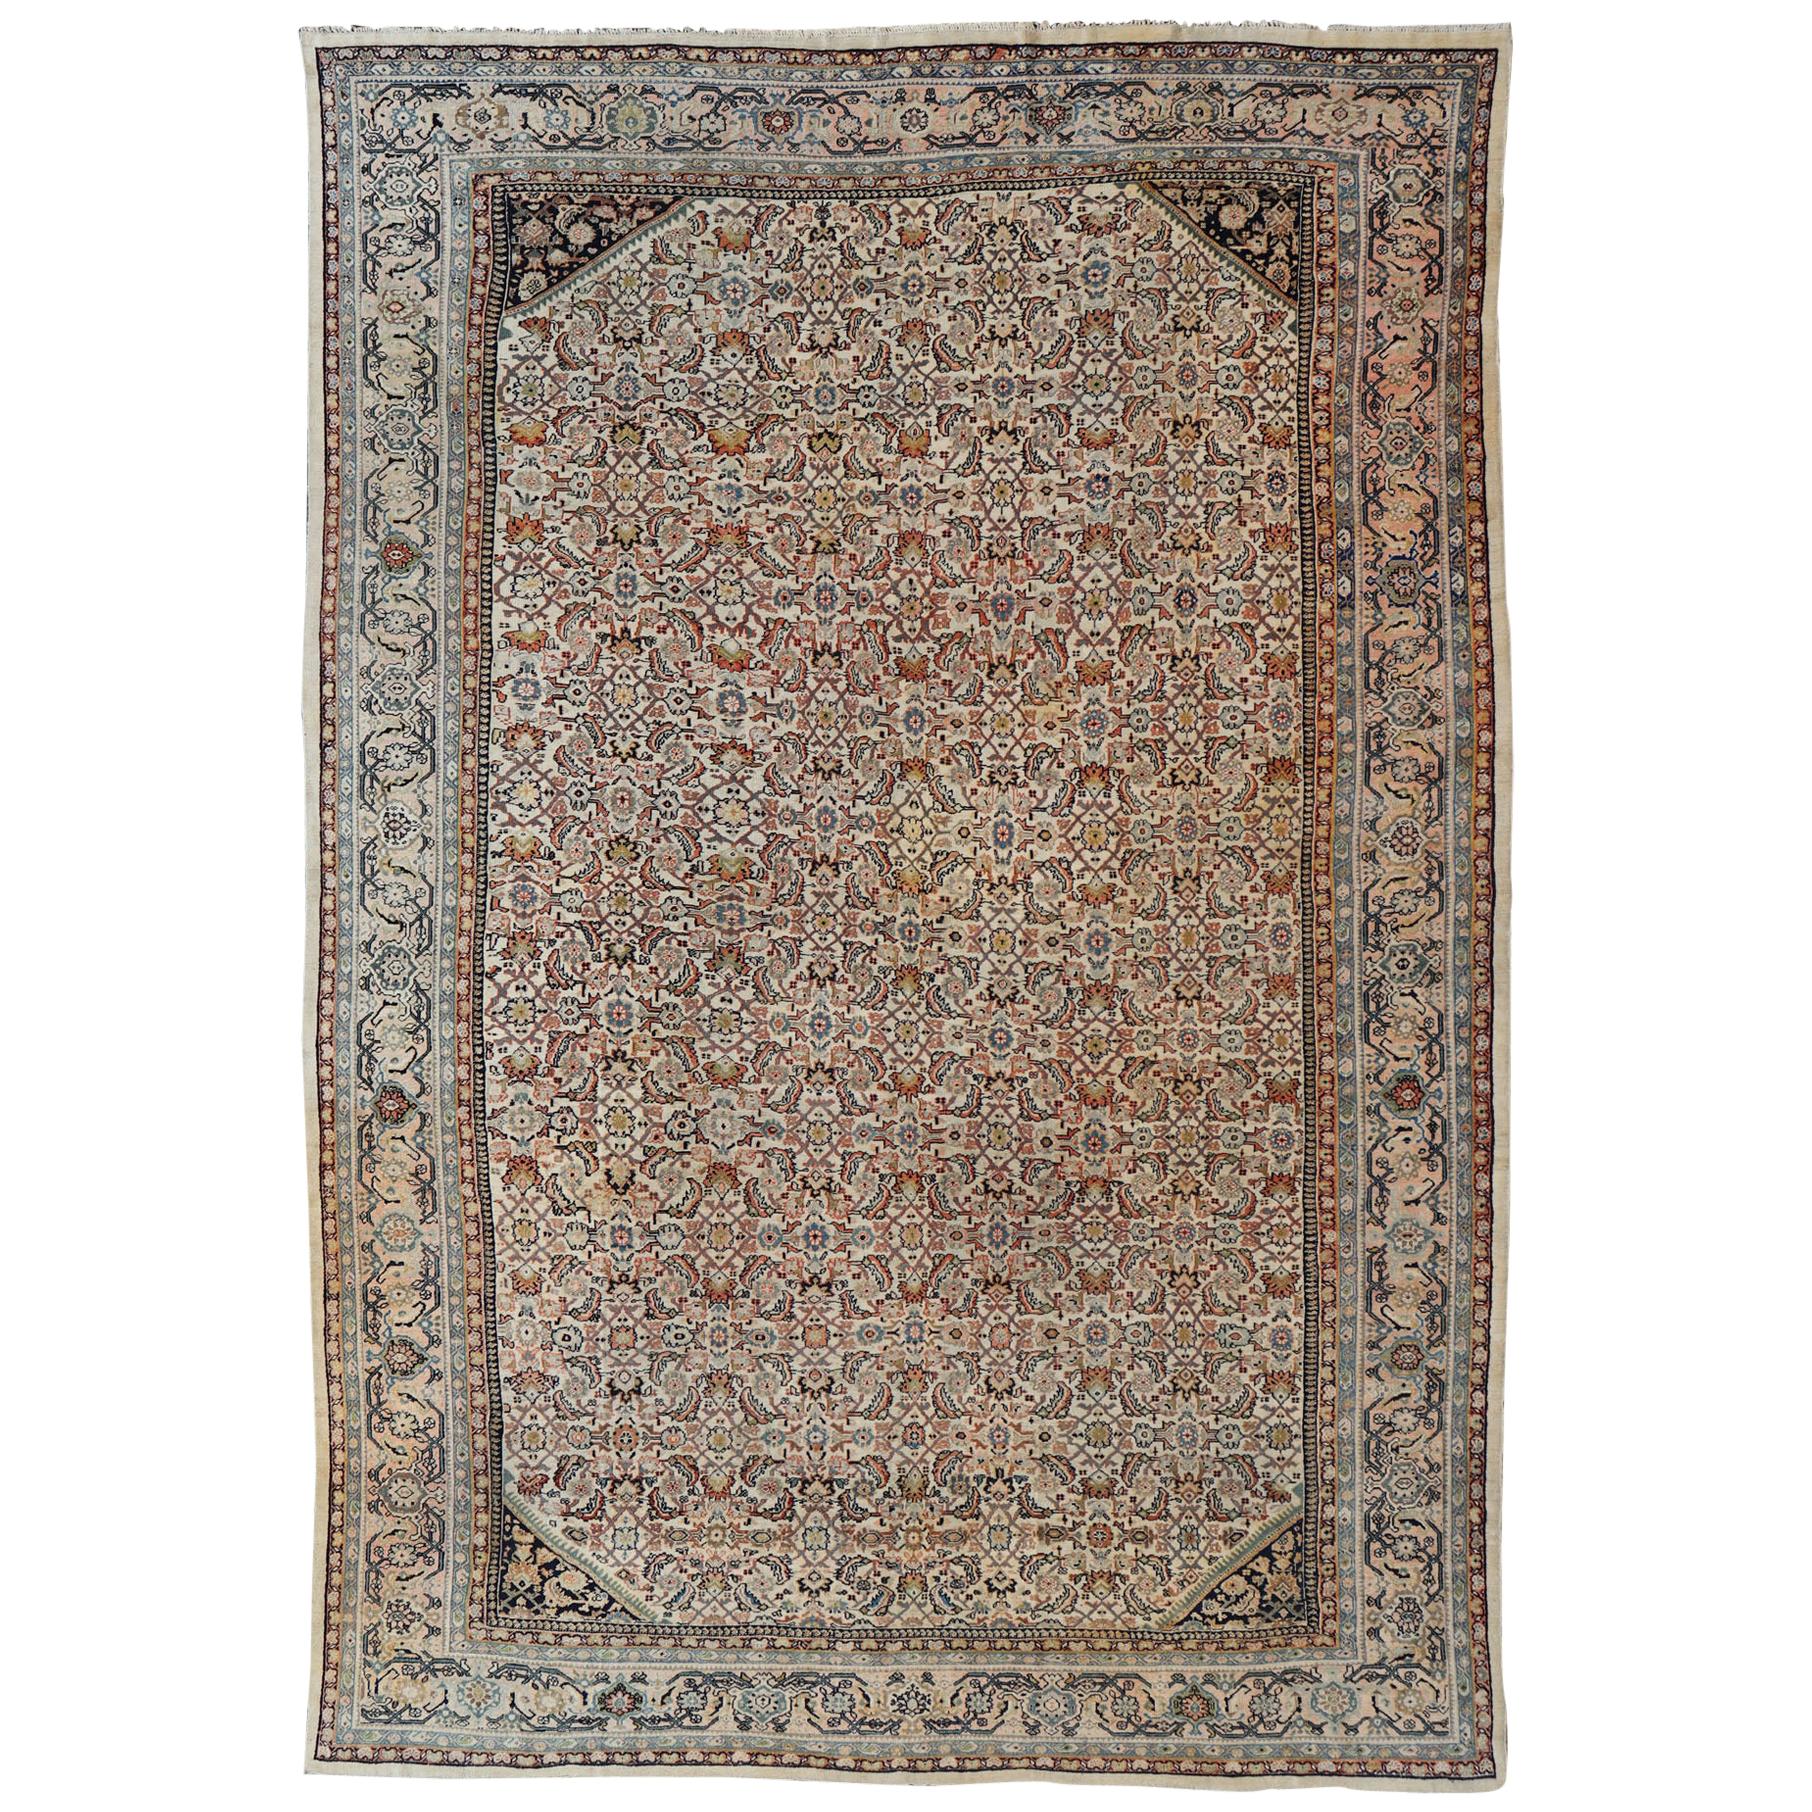 Large Antique Persian Sultanabad Rug in Ivory Background & All-Over Design